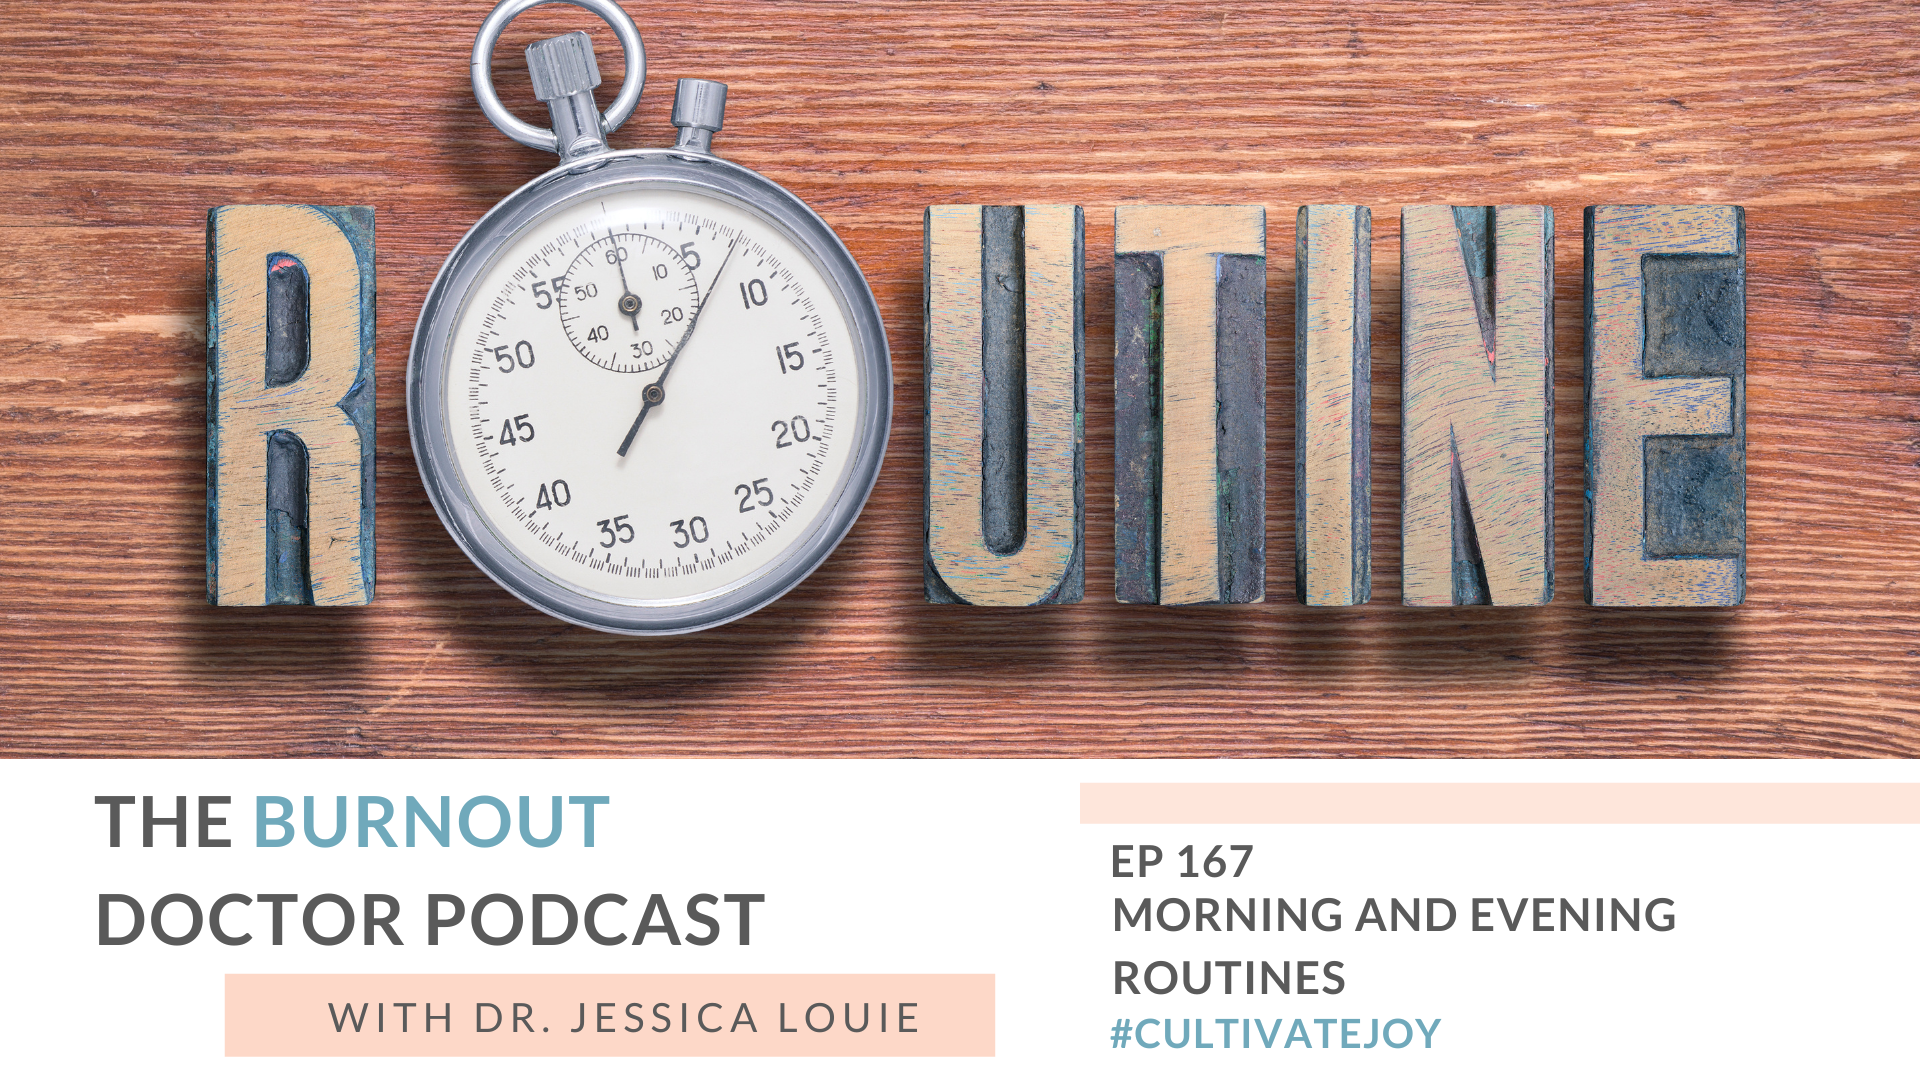 How to set up routines in life. Morning routines. Evening routines. Pharmacist burnout keynote speaker. The Burnout Doctor Podcast.